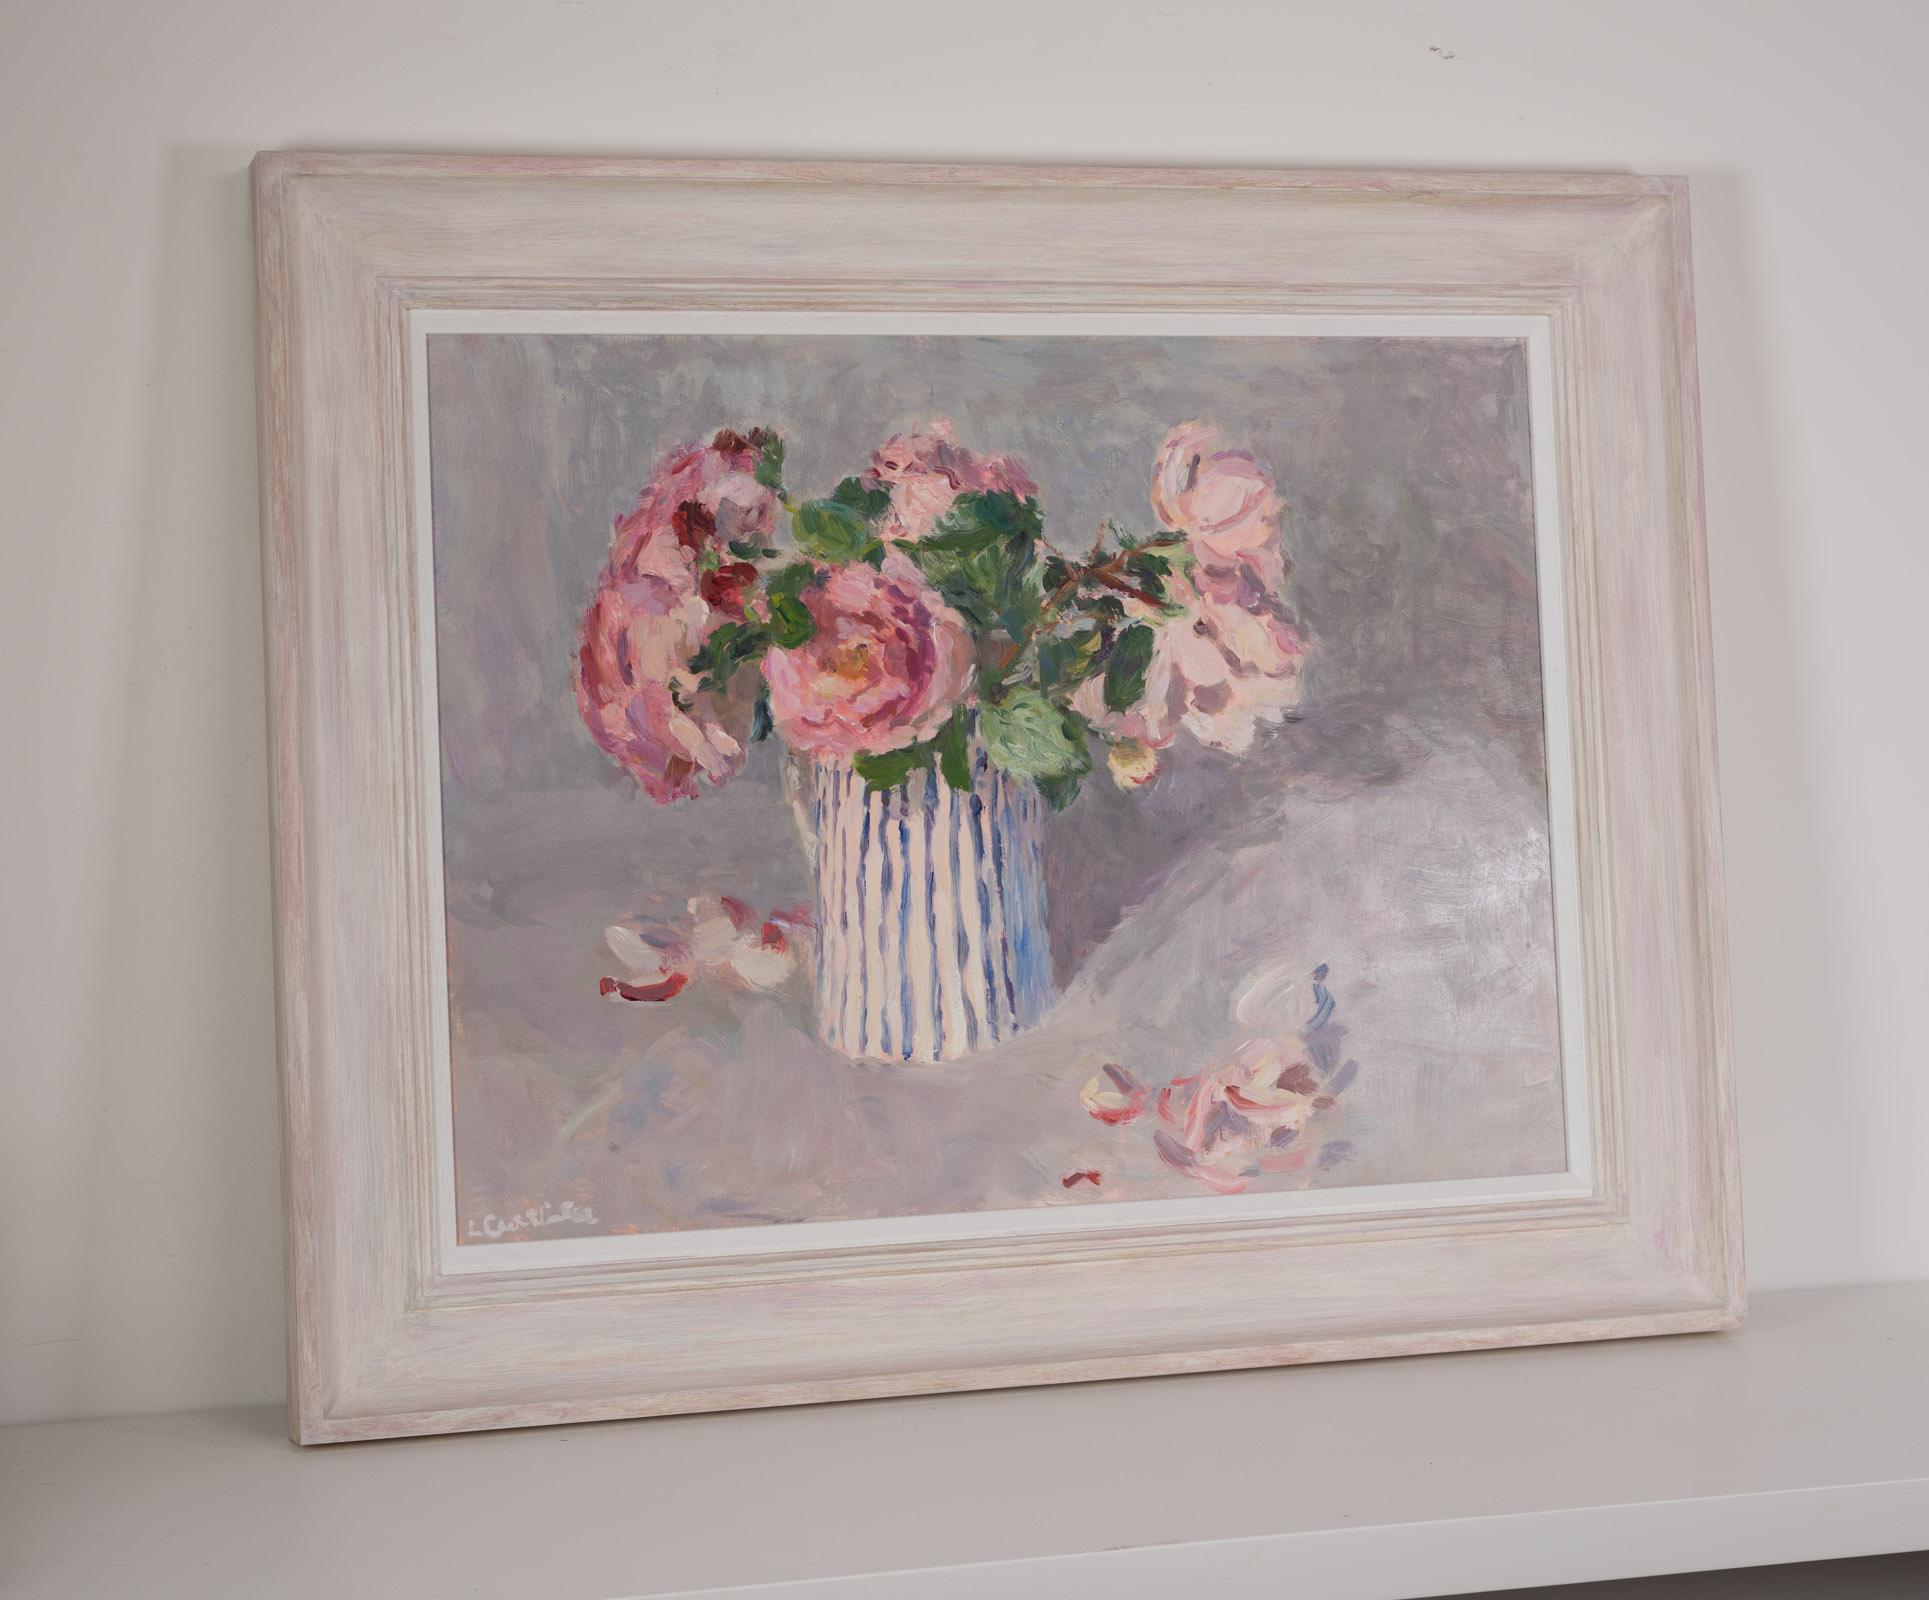 An original painting by Lynne Cartlidge. Roses in oblique light painted from life. That summer sultry atmosphere when the roses thrive in Britain, but it's almost too warm and their petals drop.

Additional information:
Roses in a Striped Jug [2023]